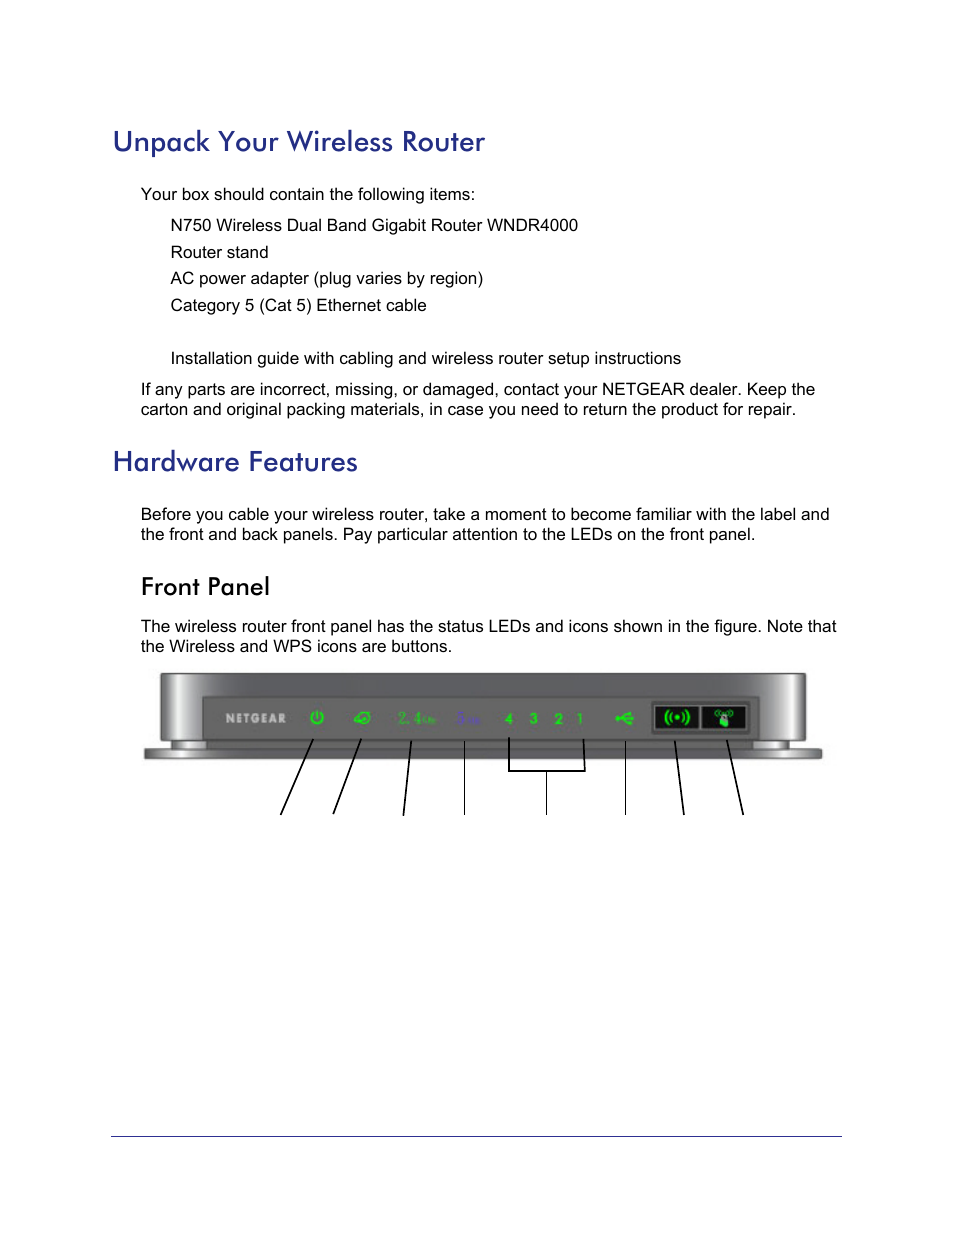 Unpack your wireless router, Hardware features, Front panel | NETGEAR N750  Wireless Dual Band Gigabit Router WNDR4000 User Manual | Page 8 / 104 |  Original mode